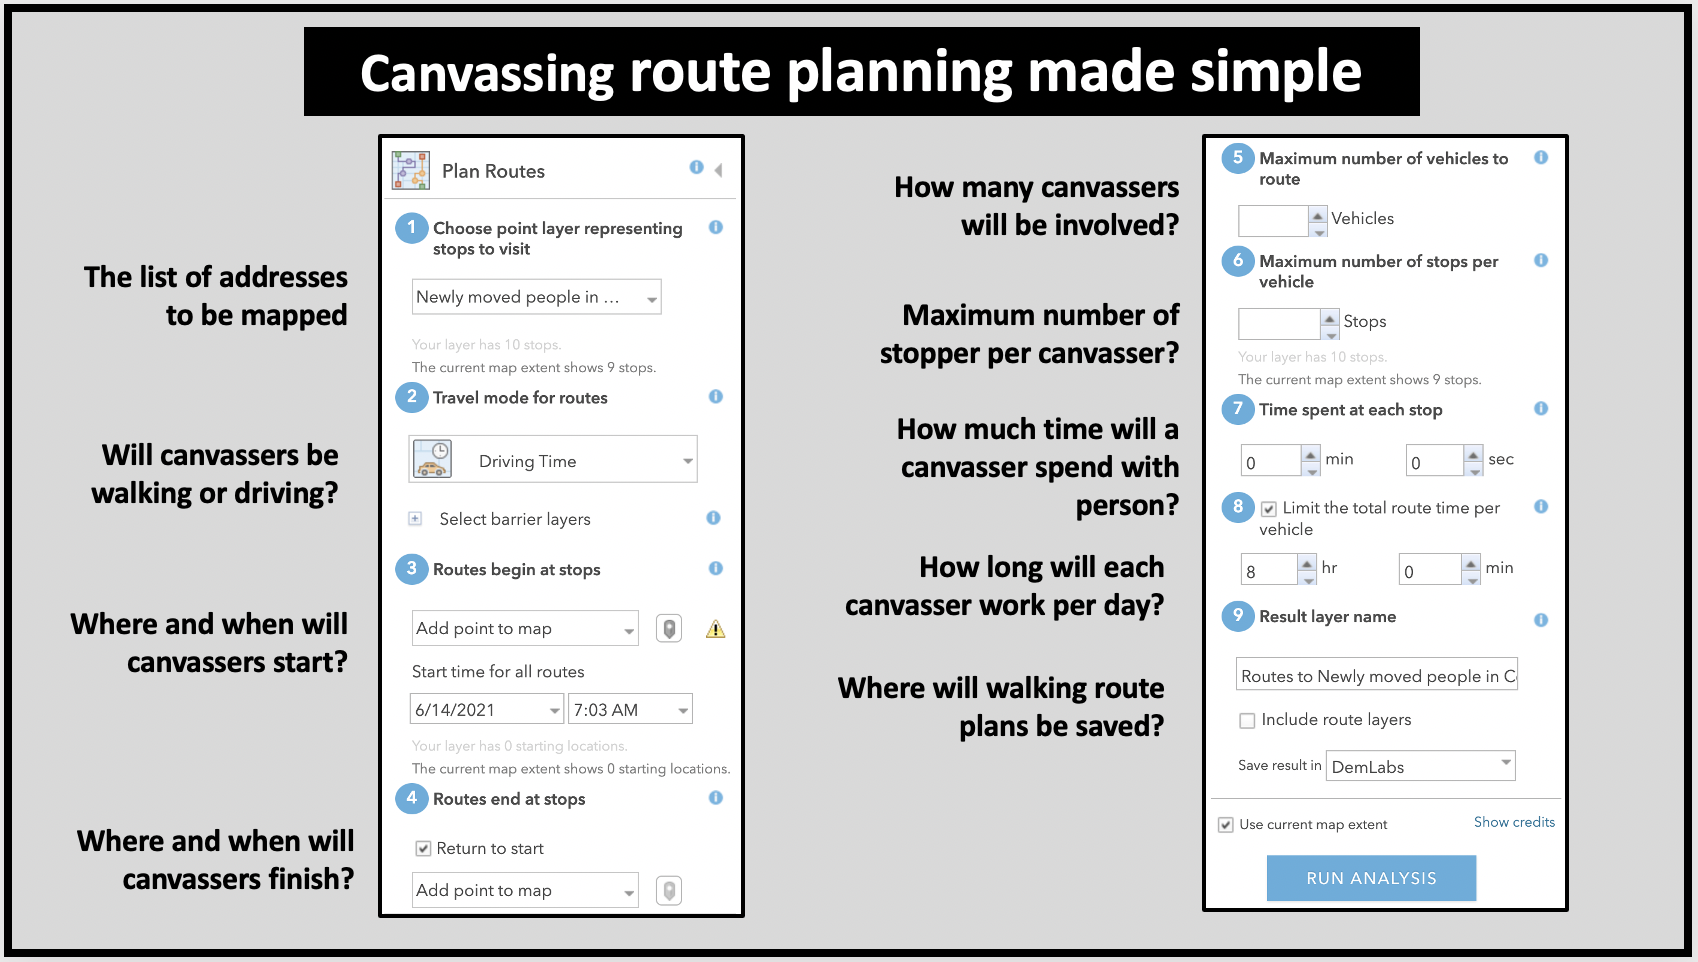 Use ArcGIS Online which costs $150/year for nonprofits to create better route plans and walking routes for canvassers.